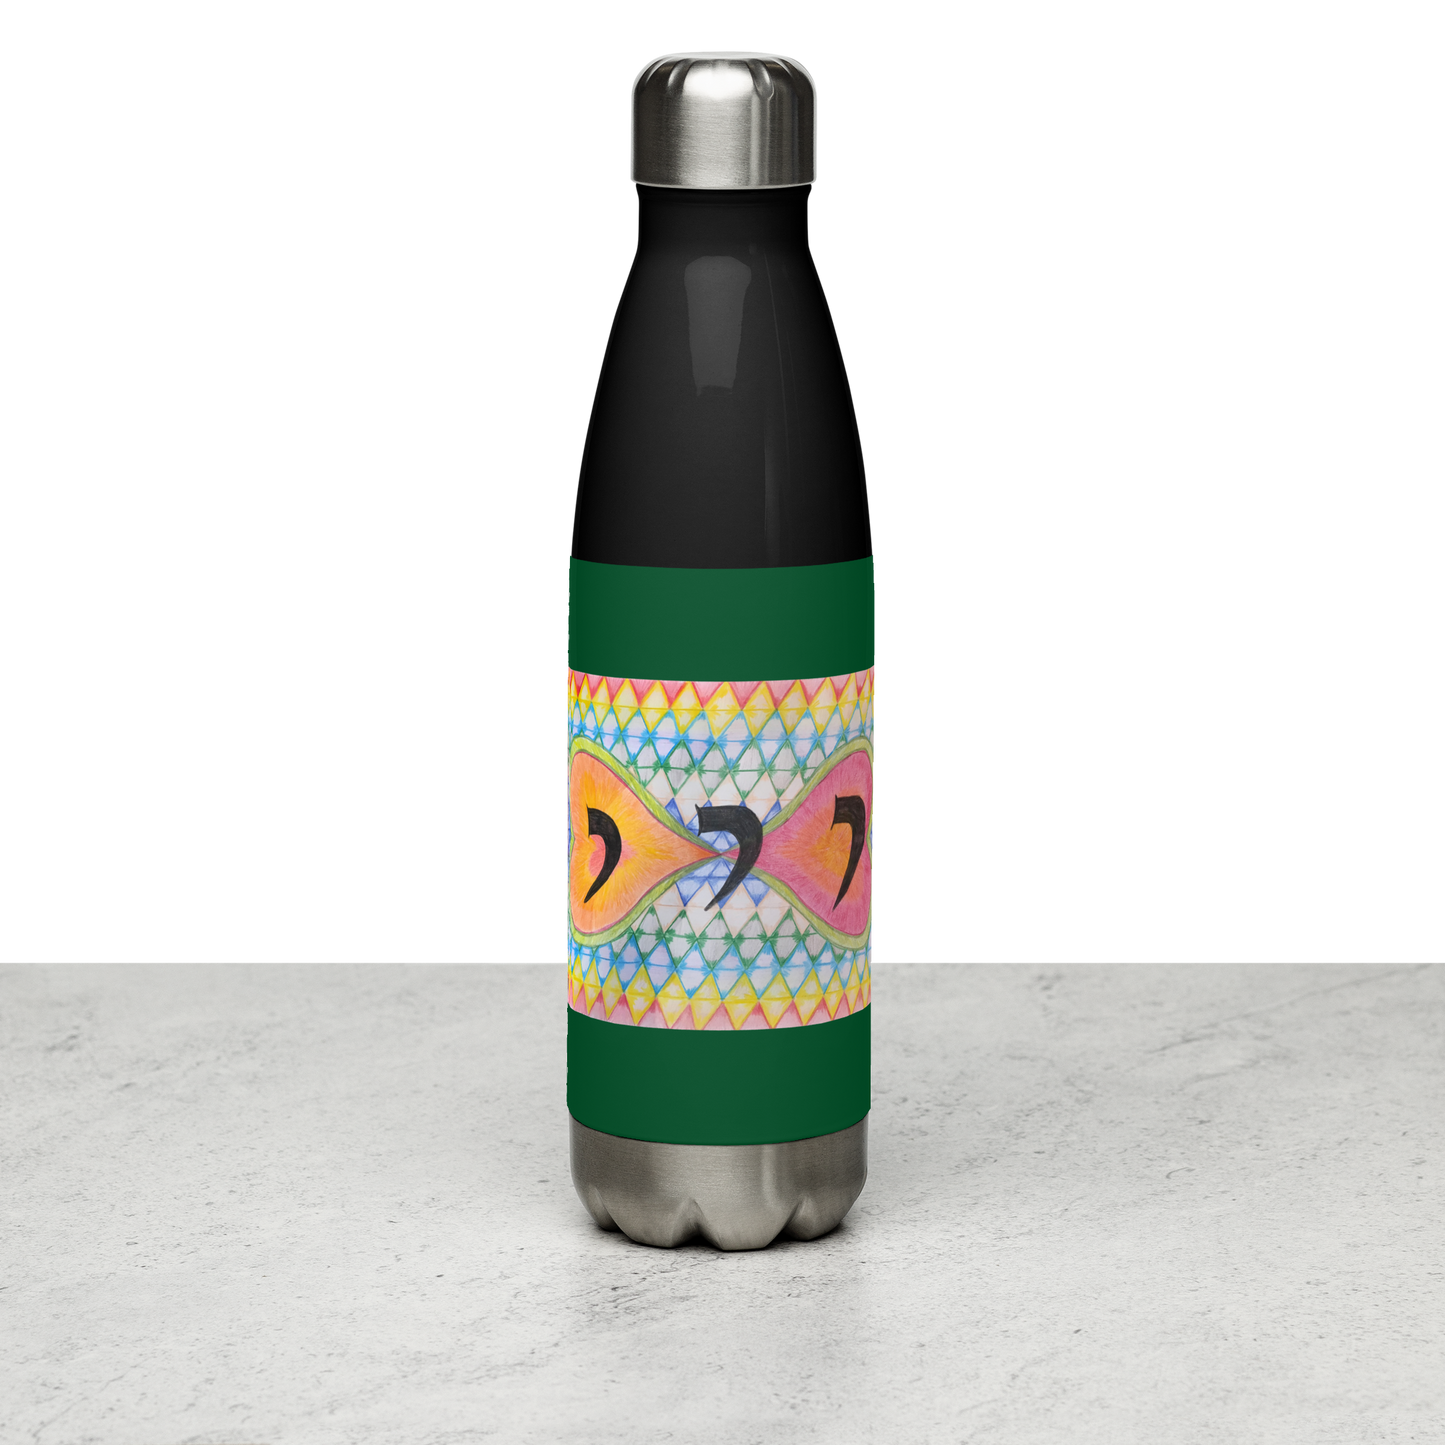  Stainless-Steel-Water-Bottle-17oz-Promote-Healthy-Relationships-(72 Names-of-God-Yud-Yud-Yud)-8-137online.com